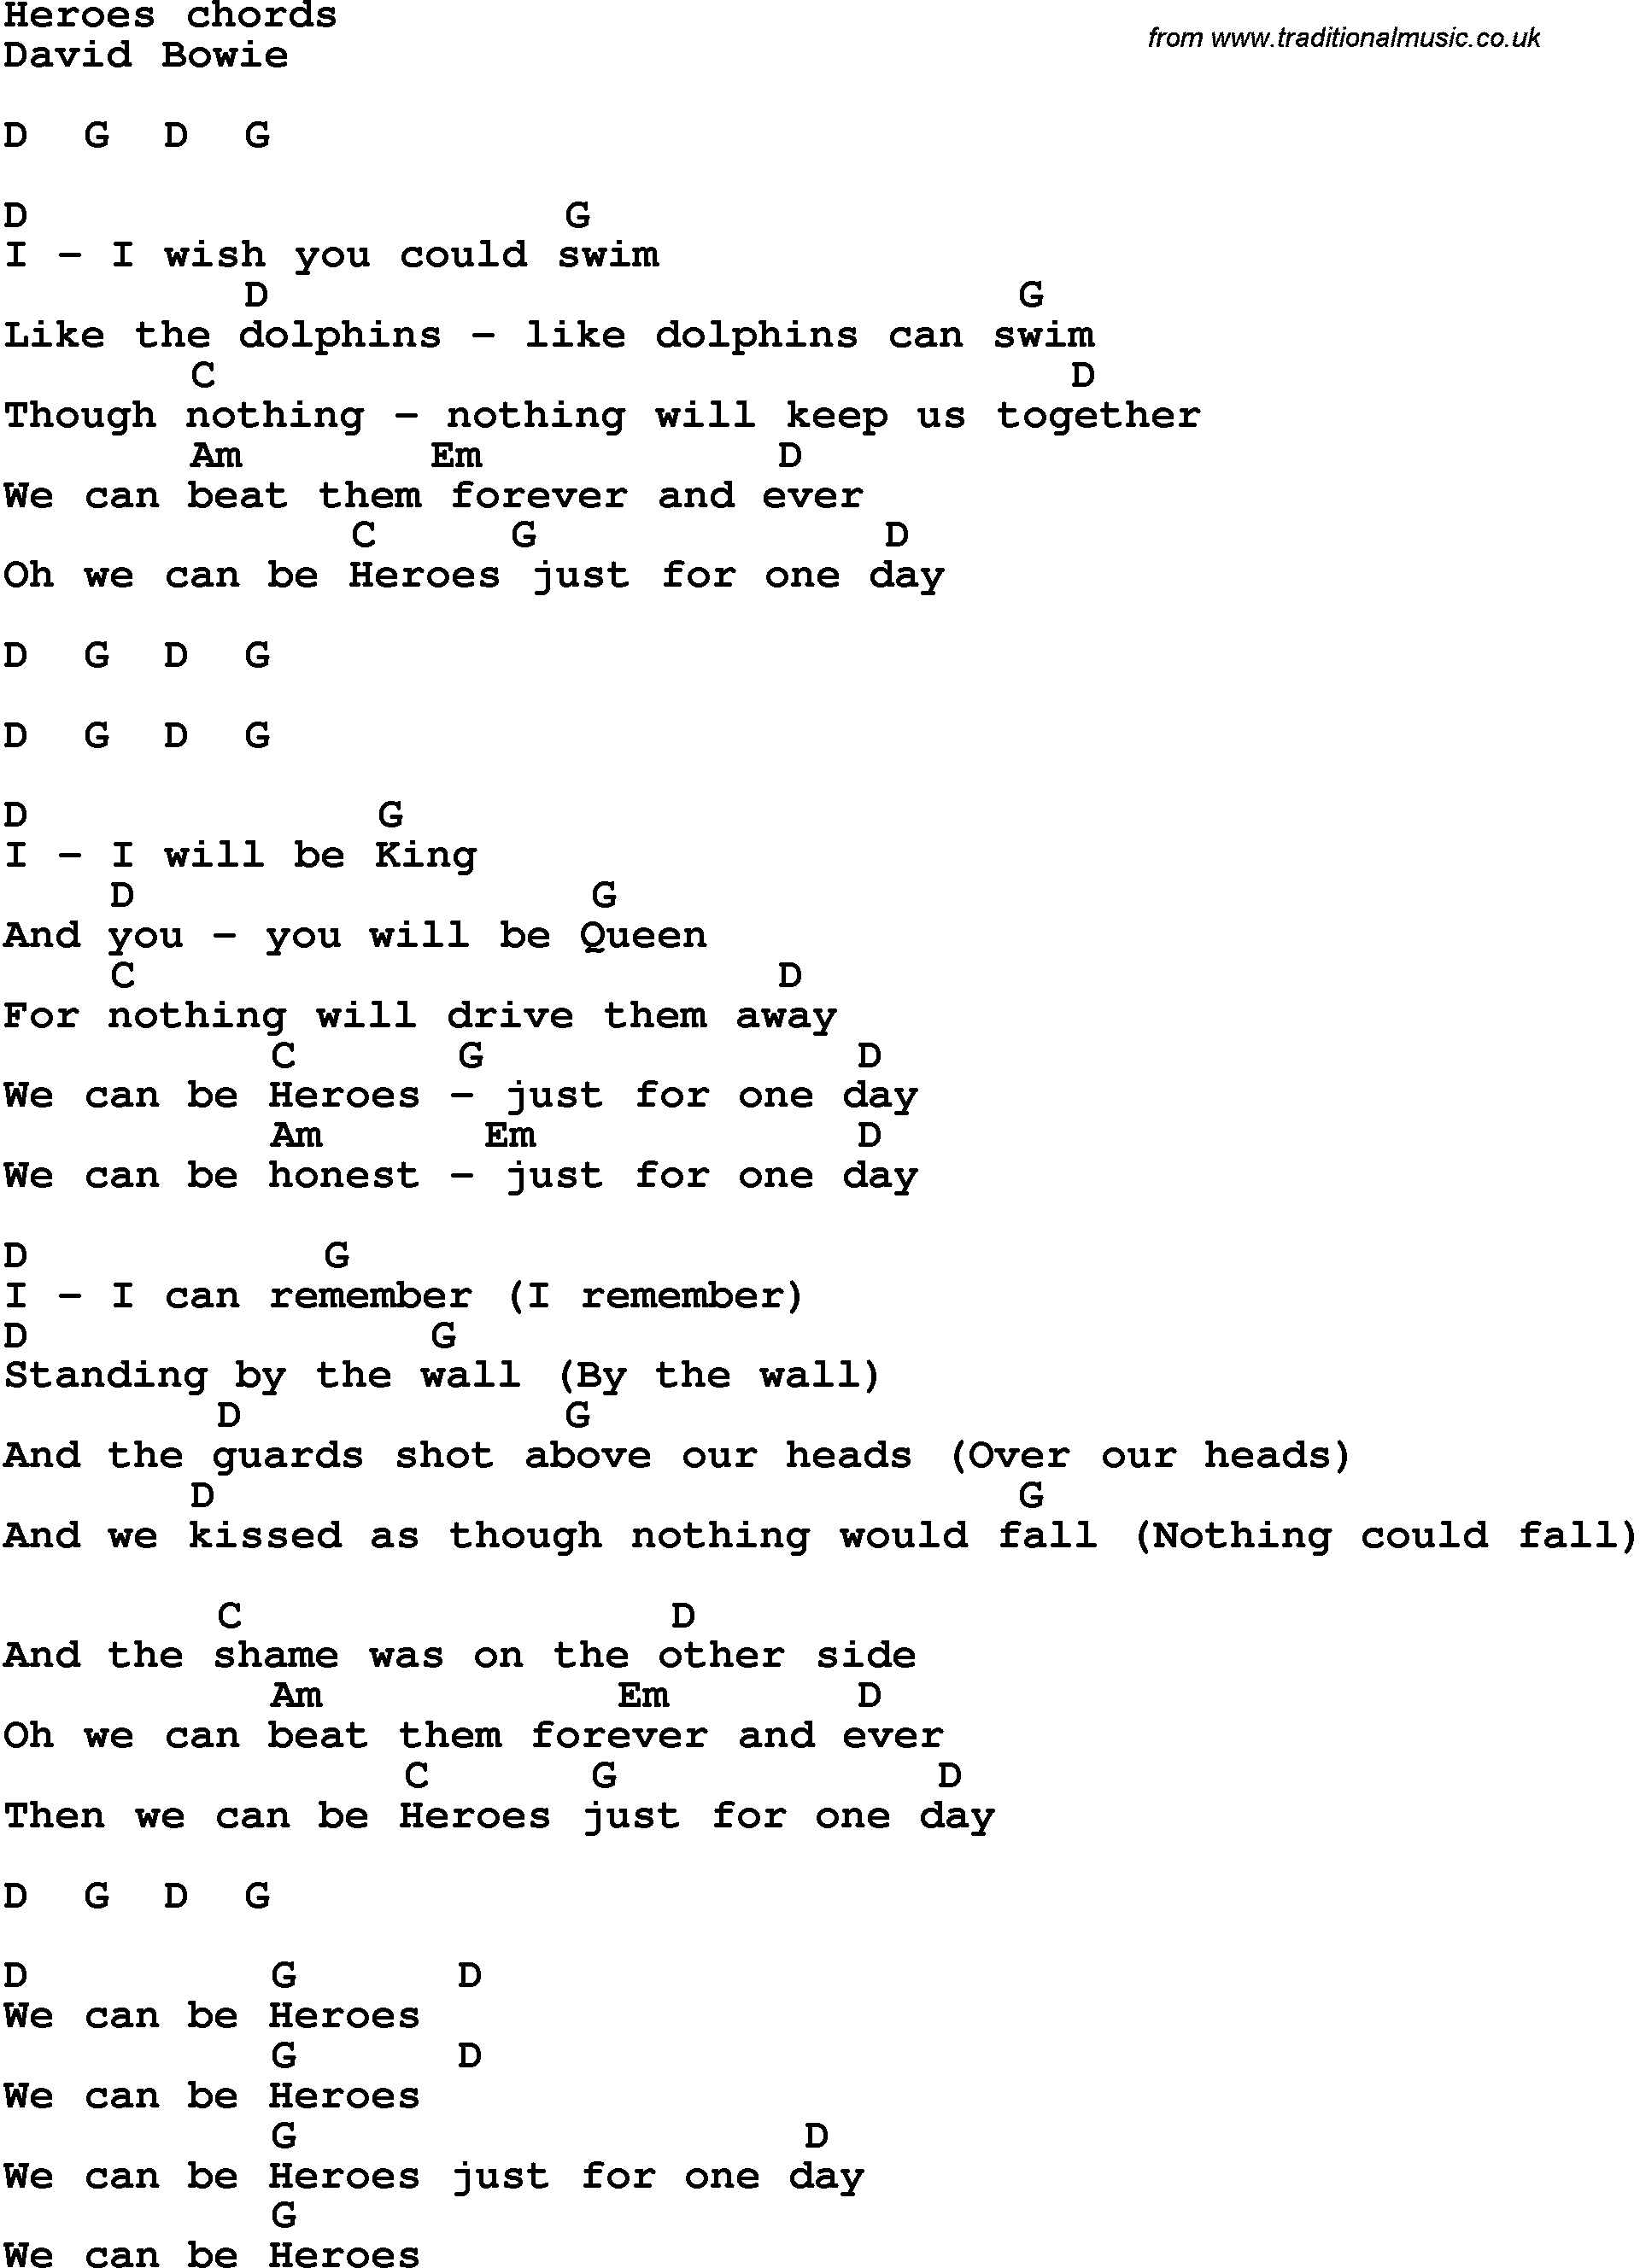 Song Lyrics with guitar chords for Hero